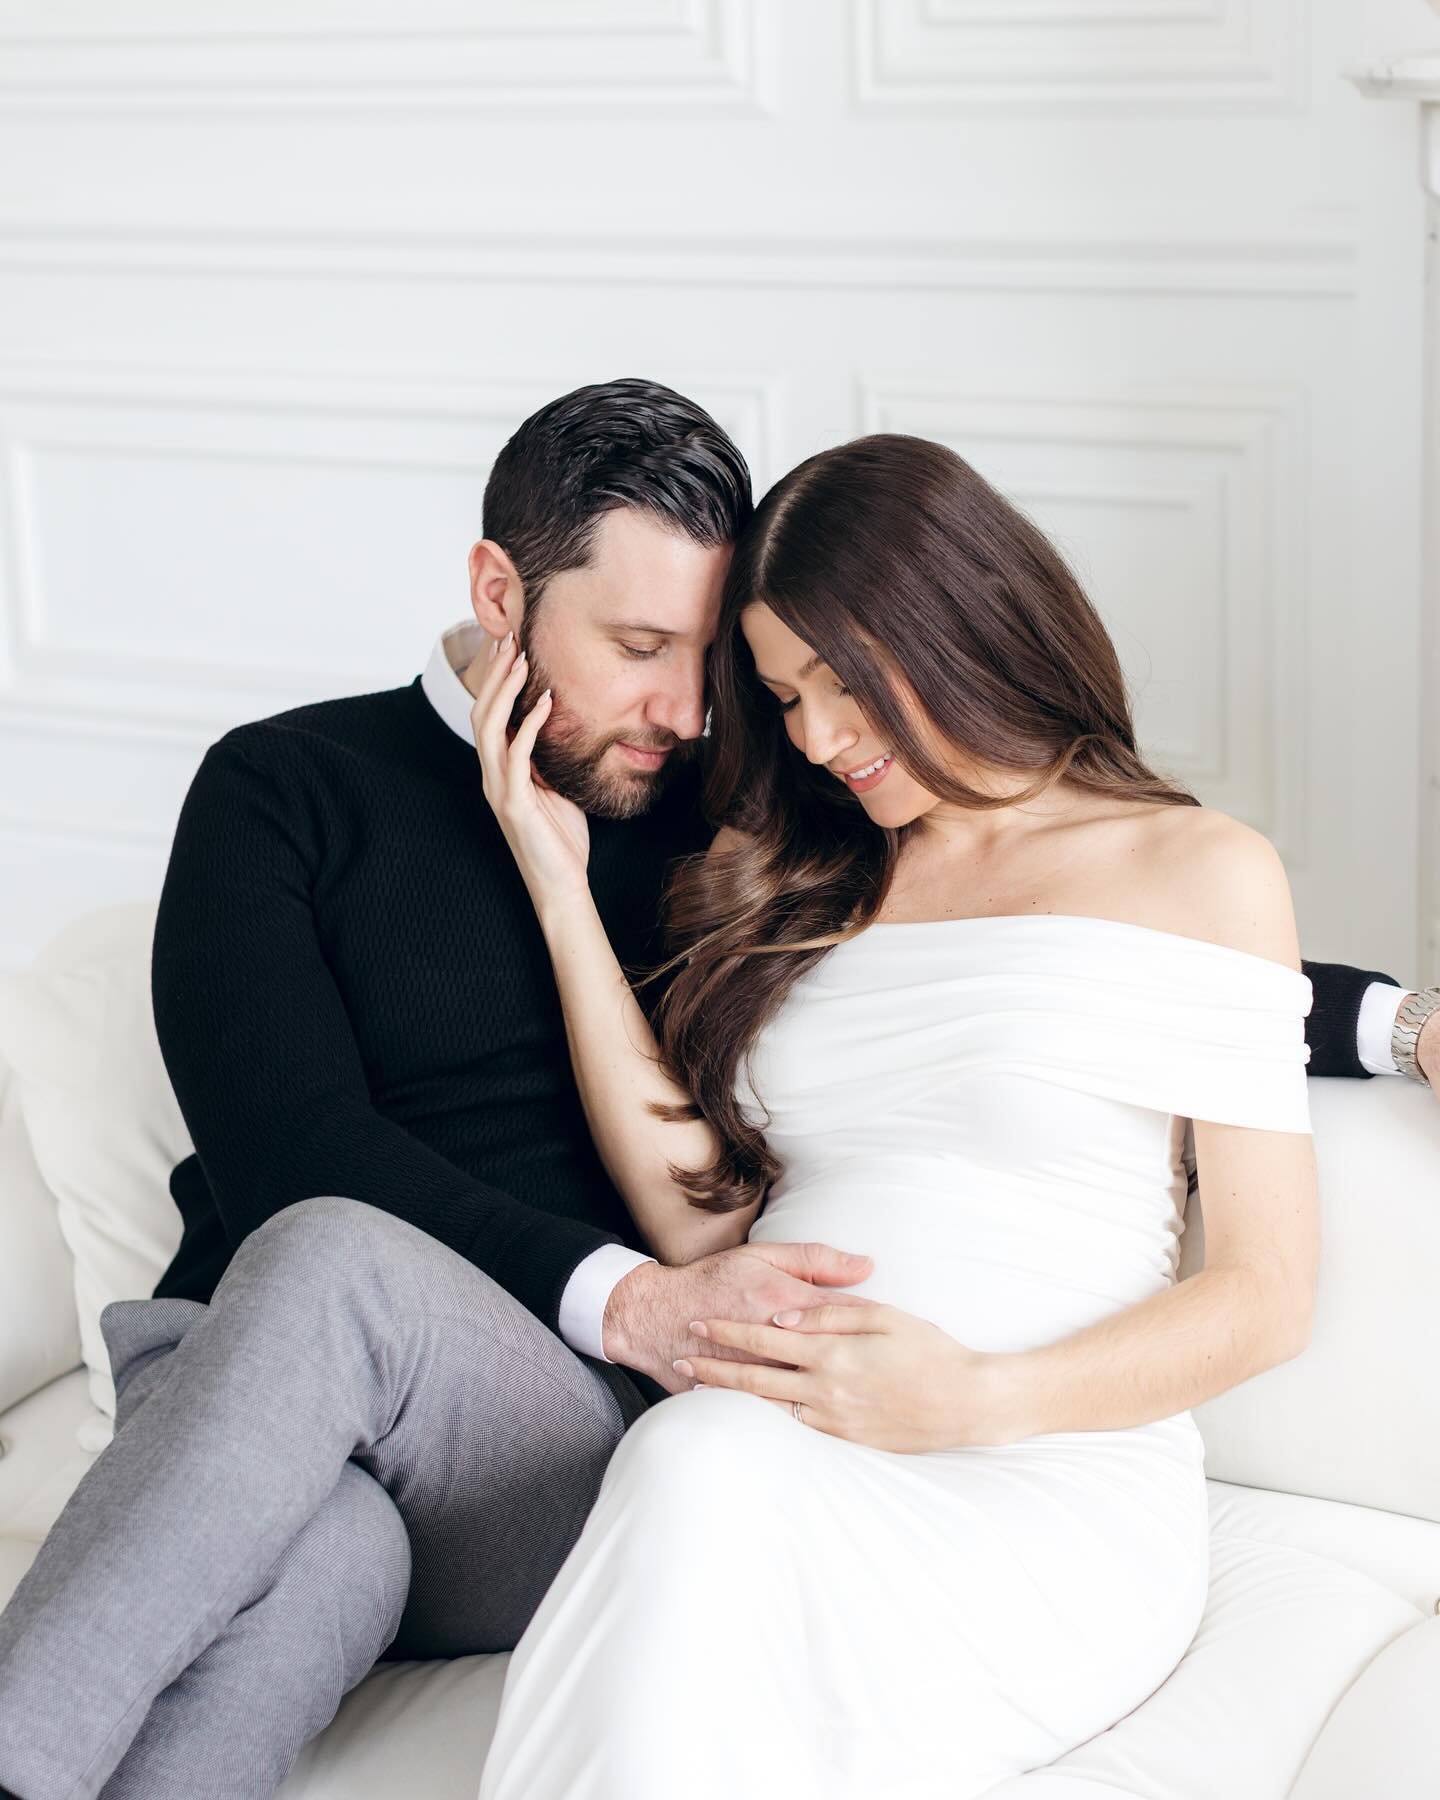 Congrats to Dana &amp; Tarek who were absolutely glowing for their maternity session! 💫 So grateful we get to capture one of life&rsquo;s biggest milestones for our couples! ❤️

#mintroomstudios #pretoloft #mintroombest #familyportraits #maternitypo